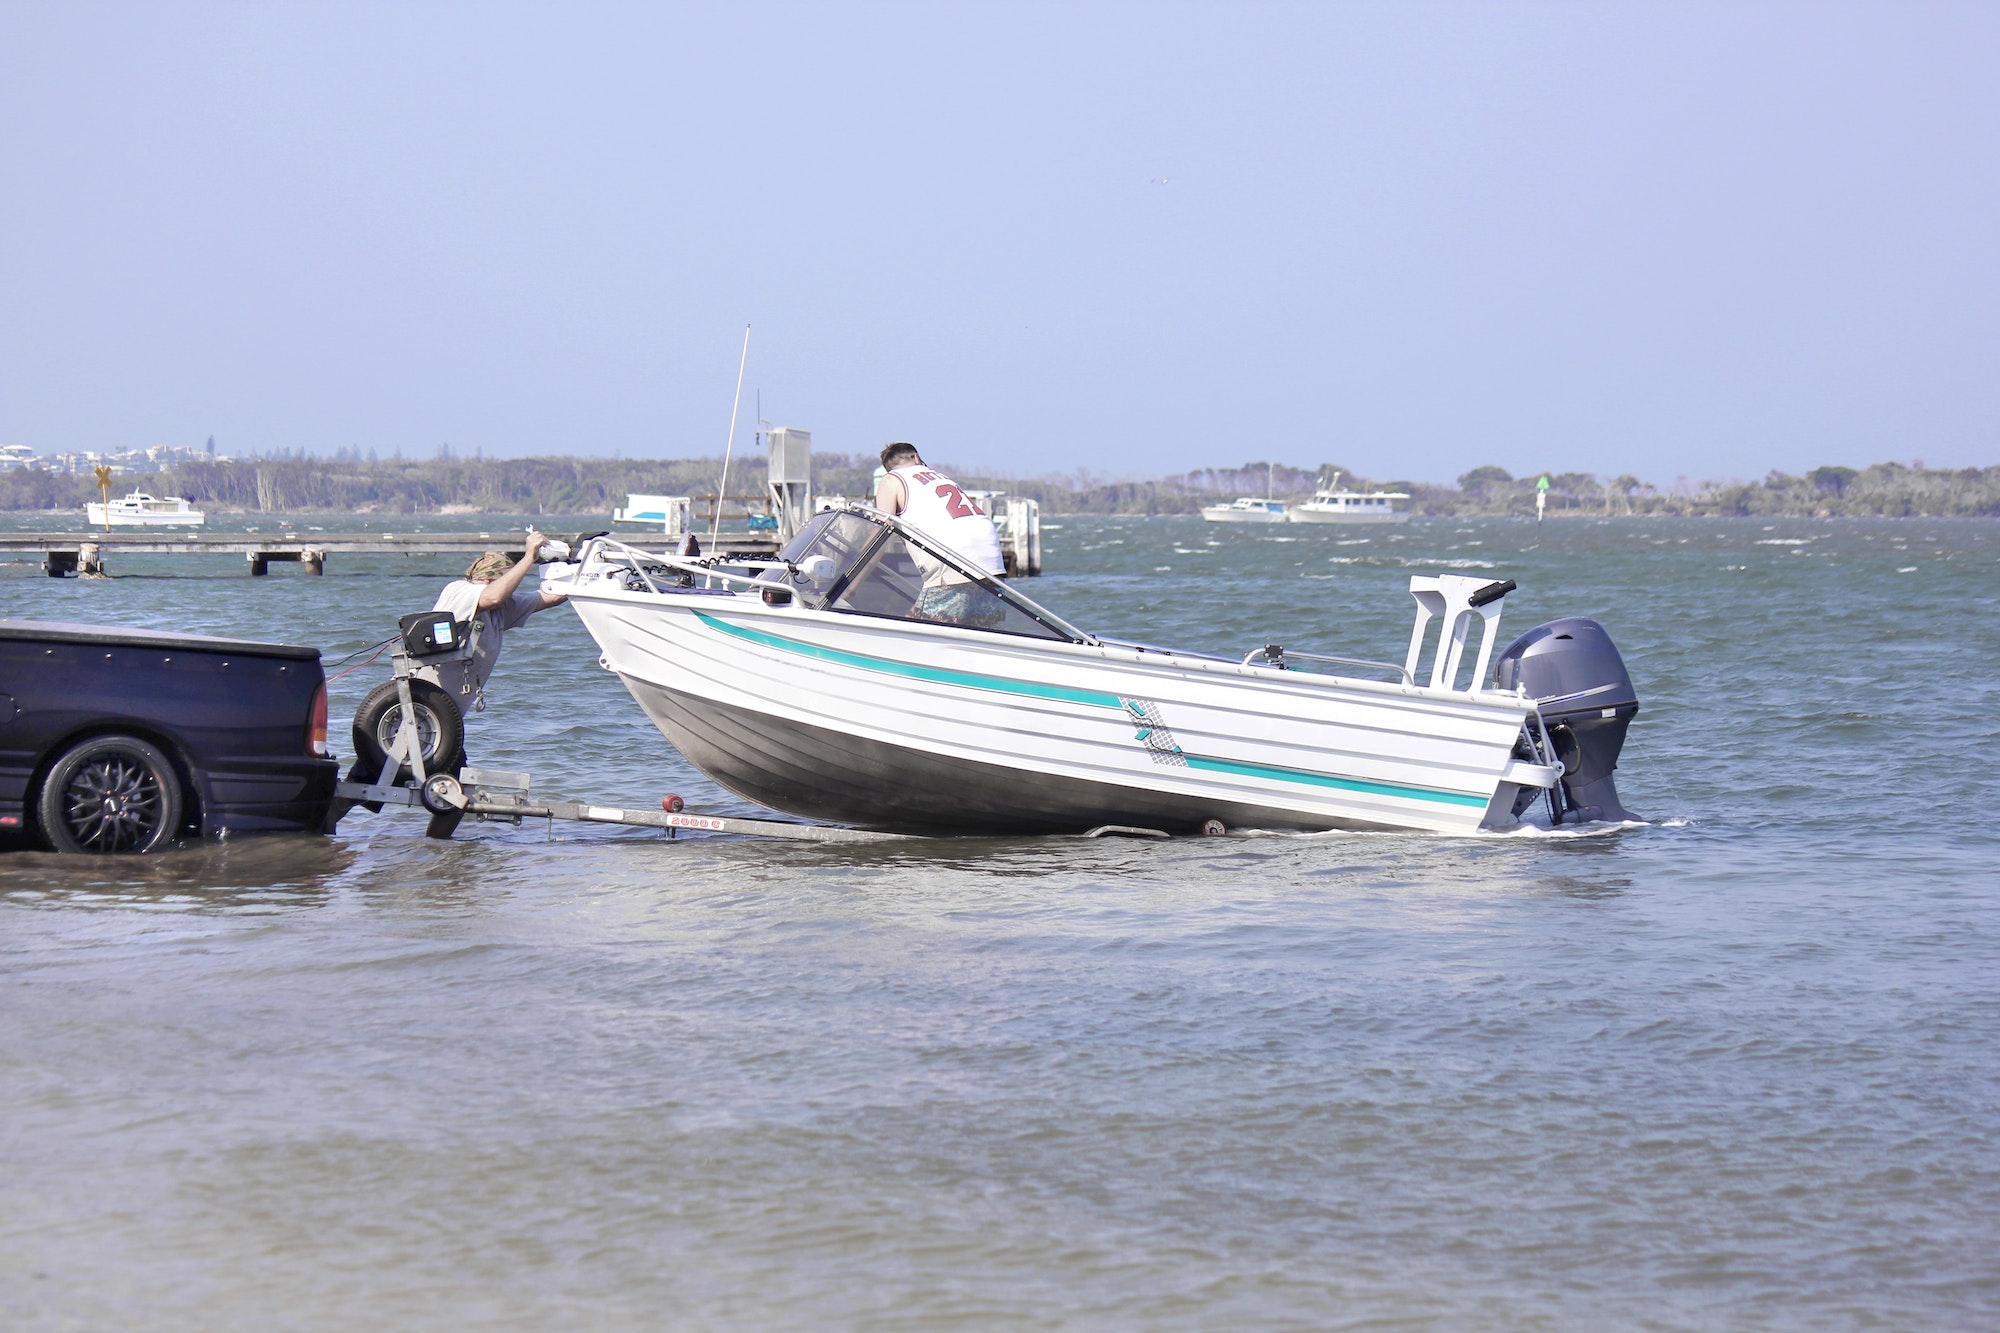 Fishermen launching a motor boat from the trailer into the water